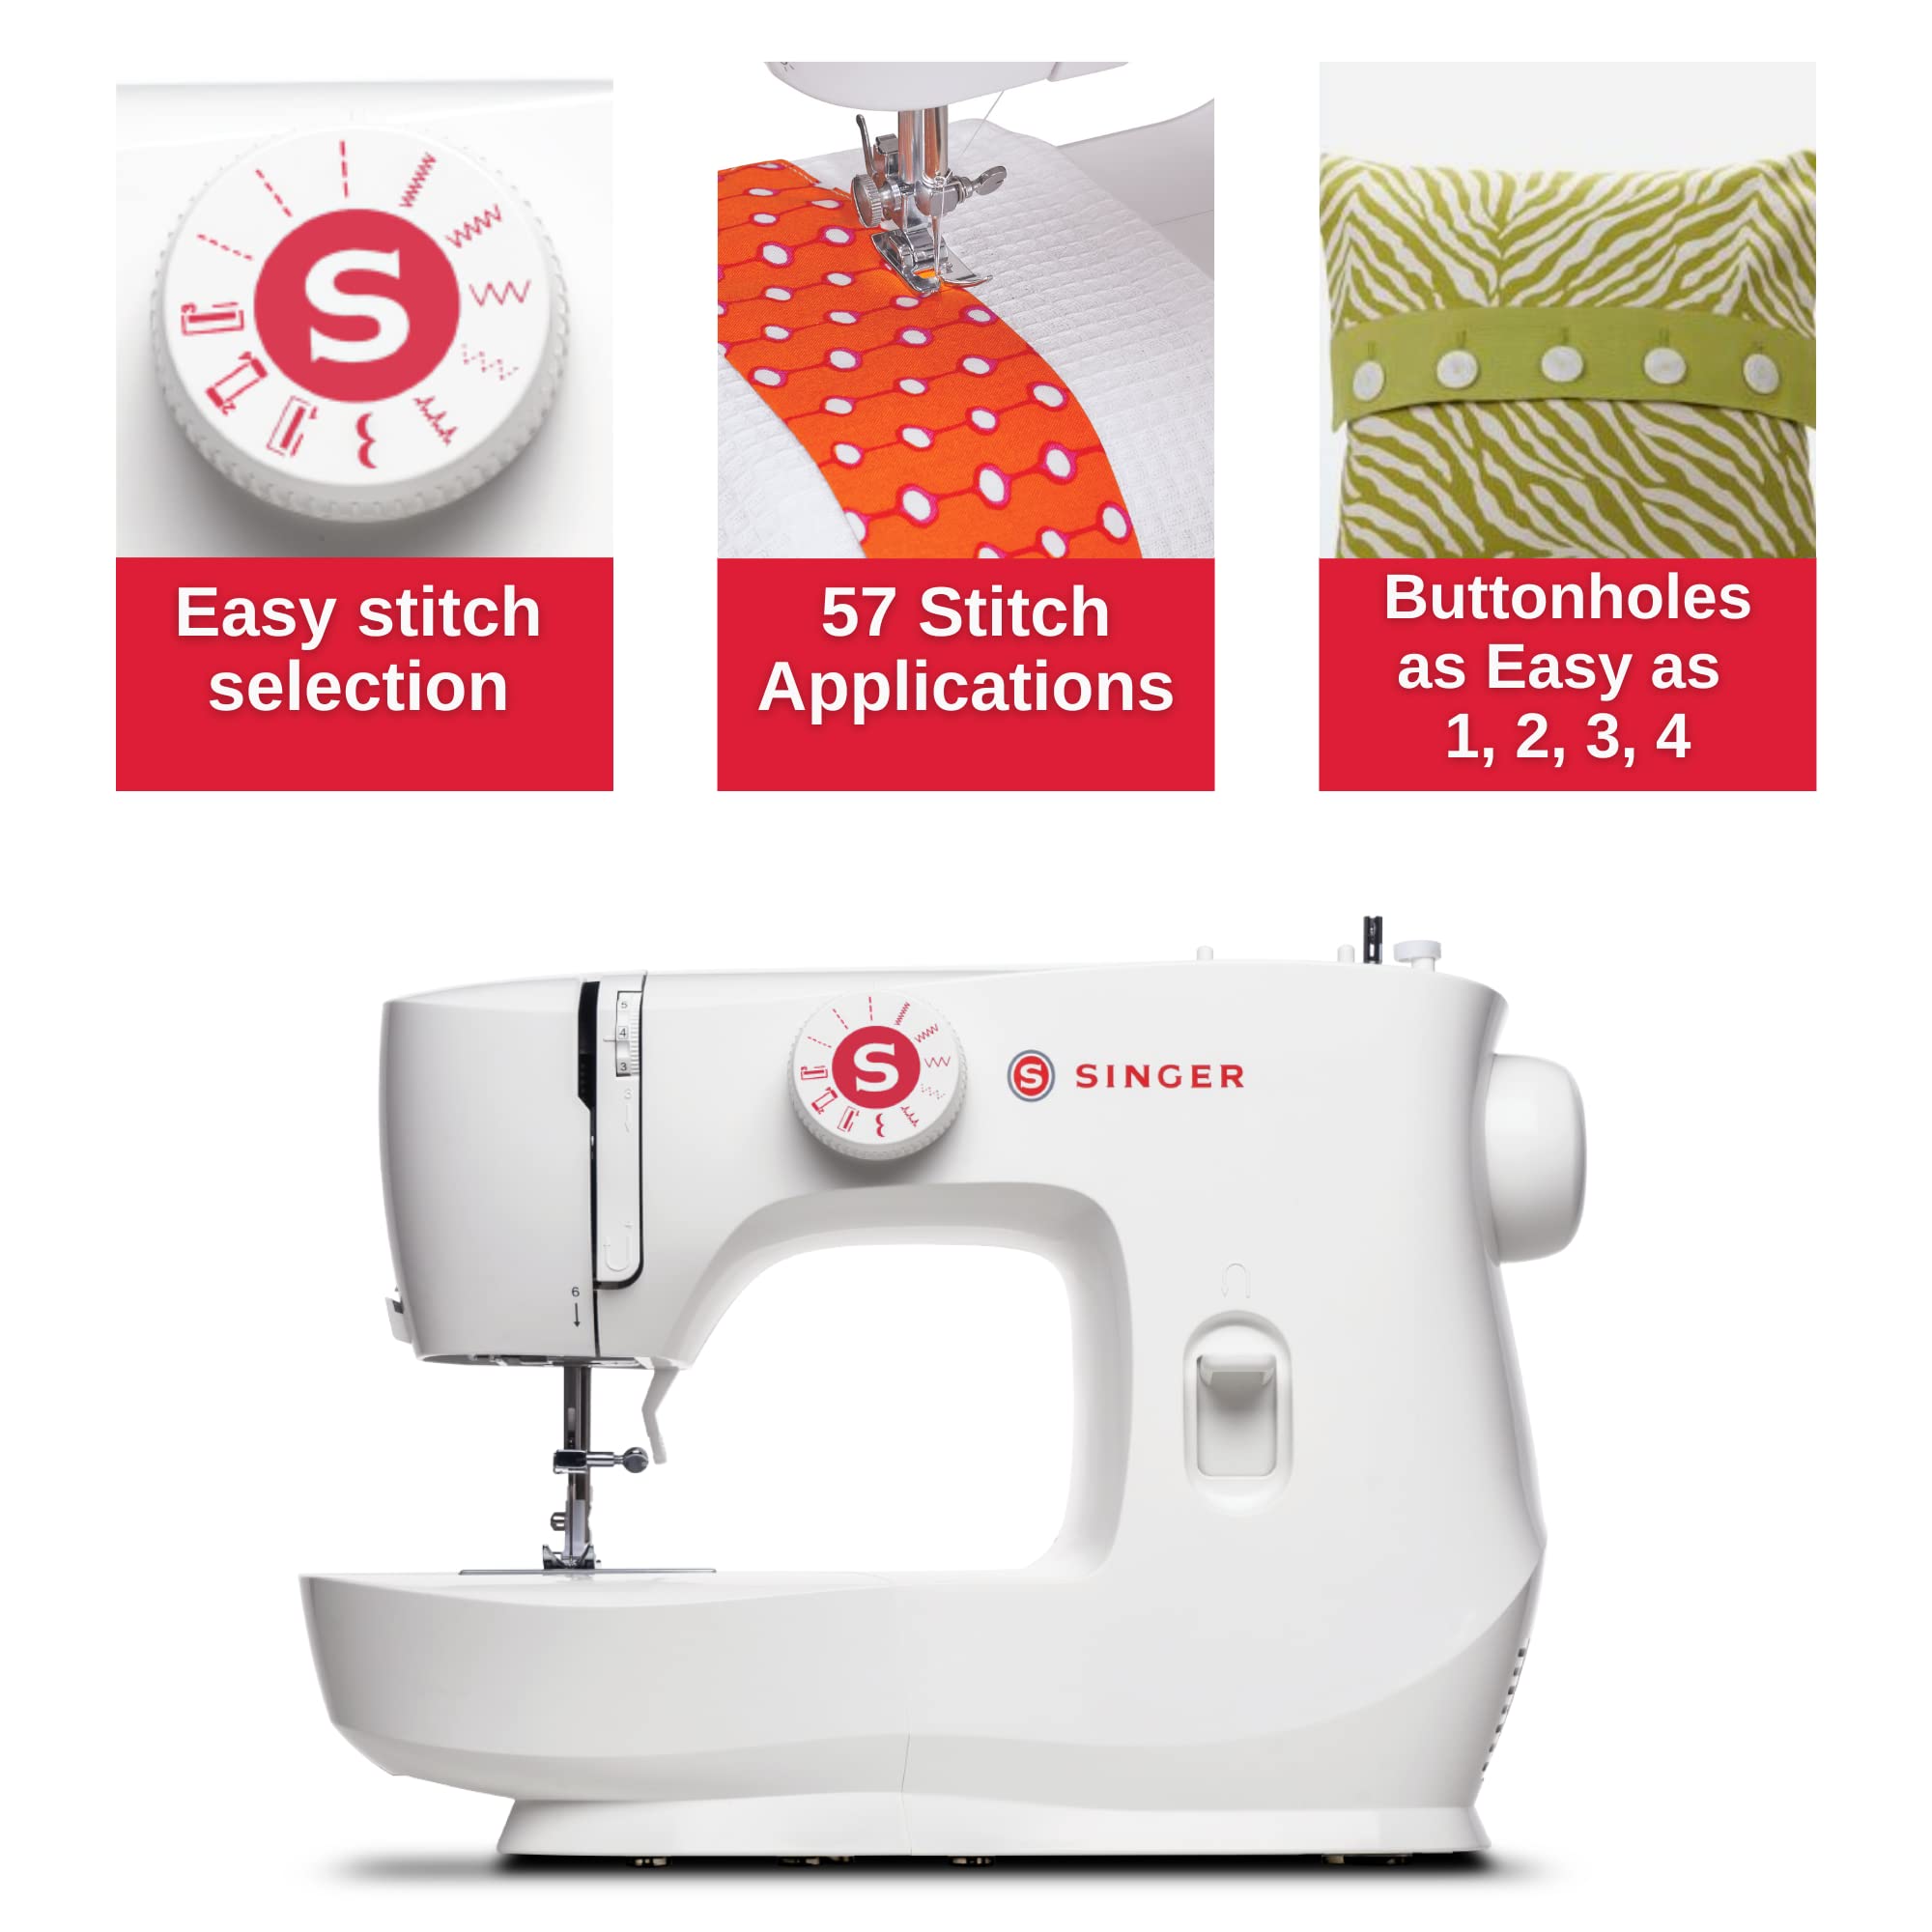 SINGER | MX60 Sewing Machine With Accessory Kit & Foot Pedal - 57 Stitch Applications - Simple & Great for Beginners $90.99